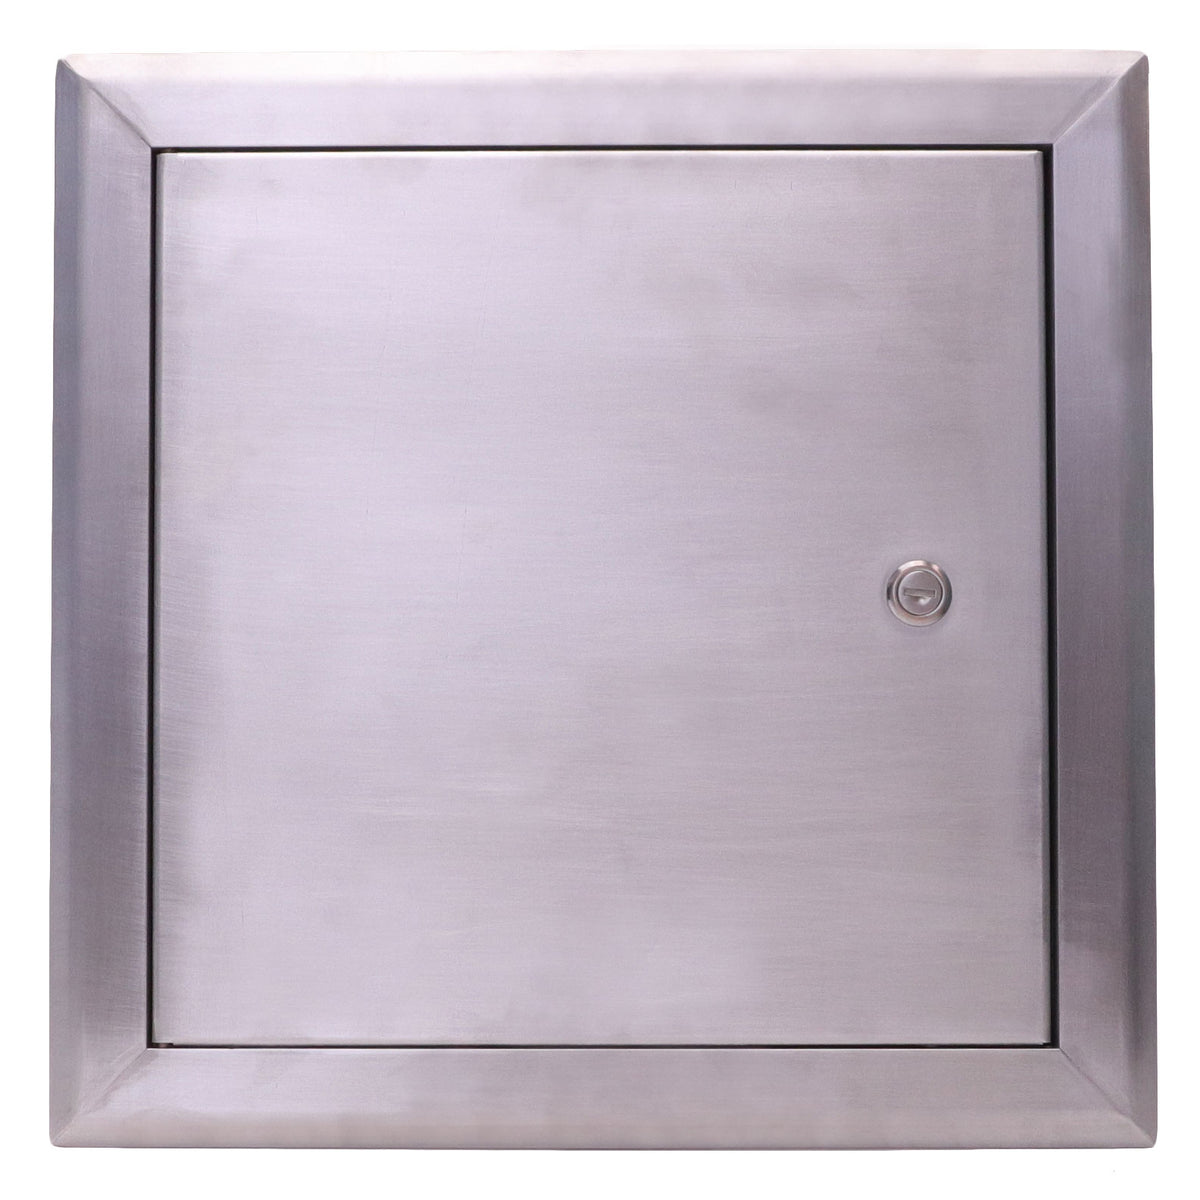 20&quot; X 20&quot; Aluminum Color Insulated Fire Rated Access Panel Door For Wall / Ceiling Application (Lock and Key) With Frame - [Outer Dimensions: 21&quot; Width X 21&quot; Height]